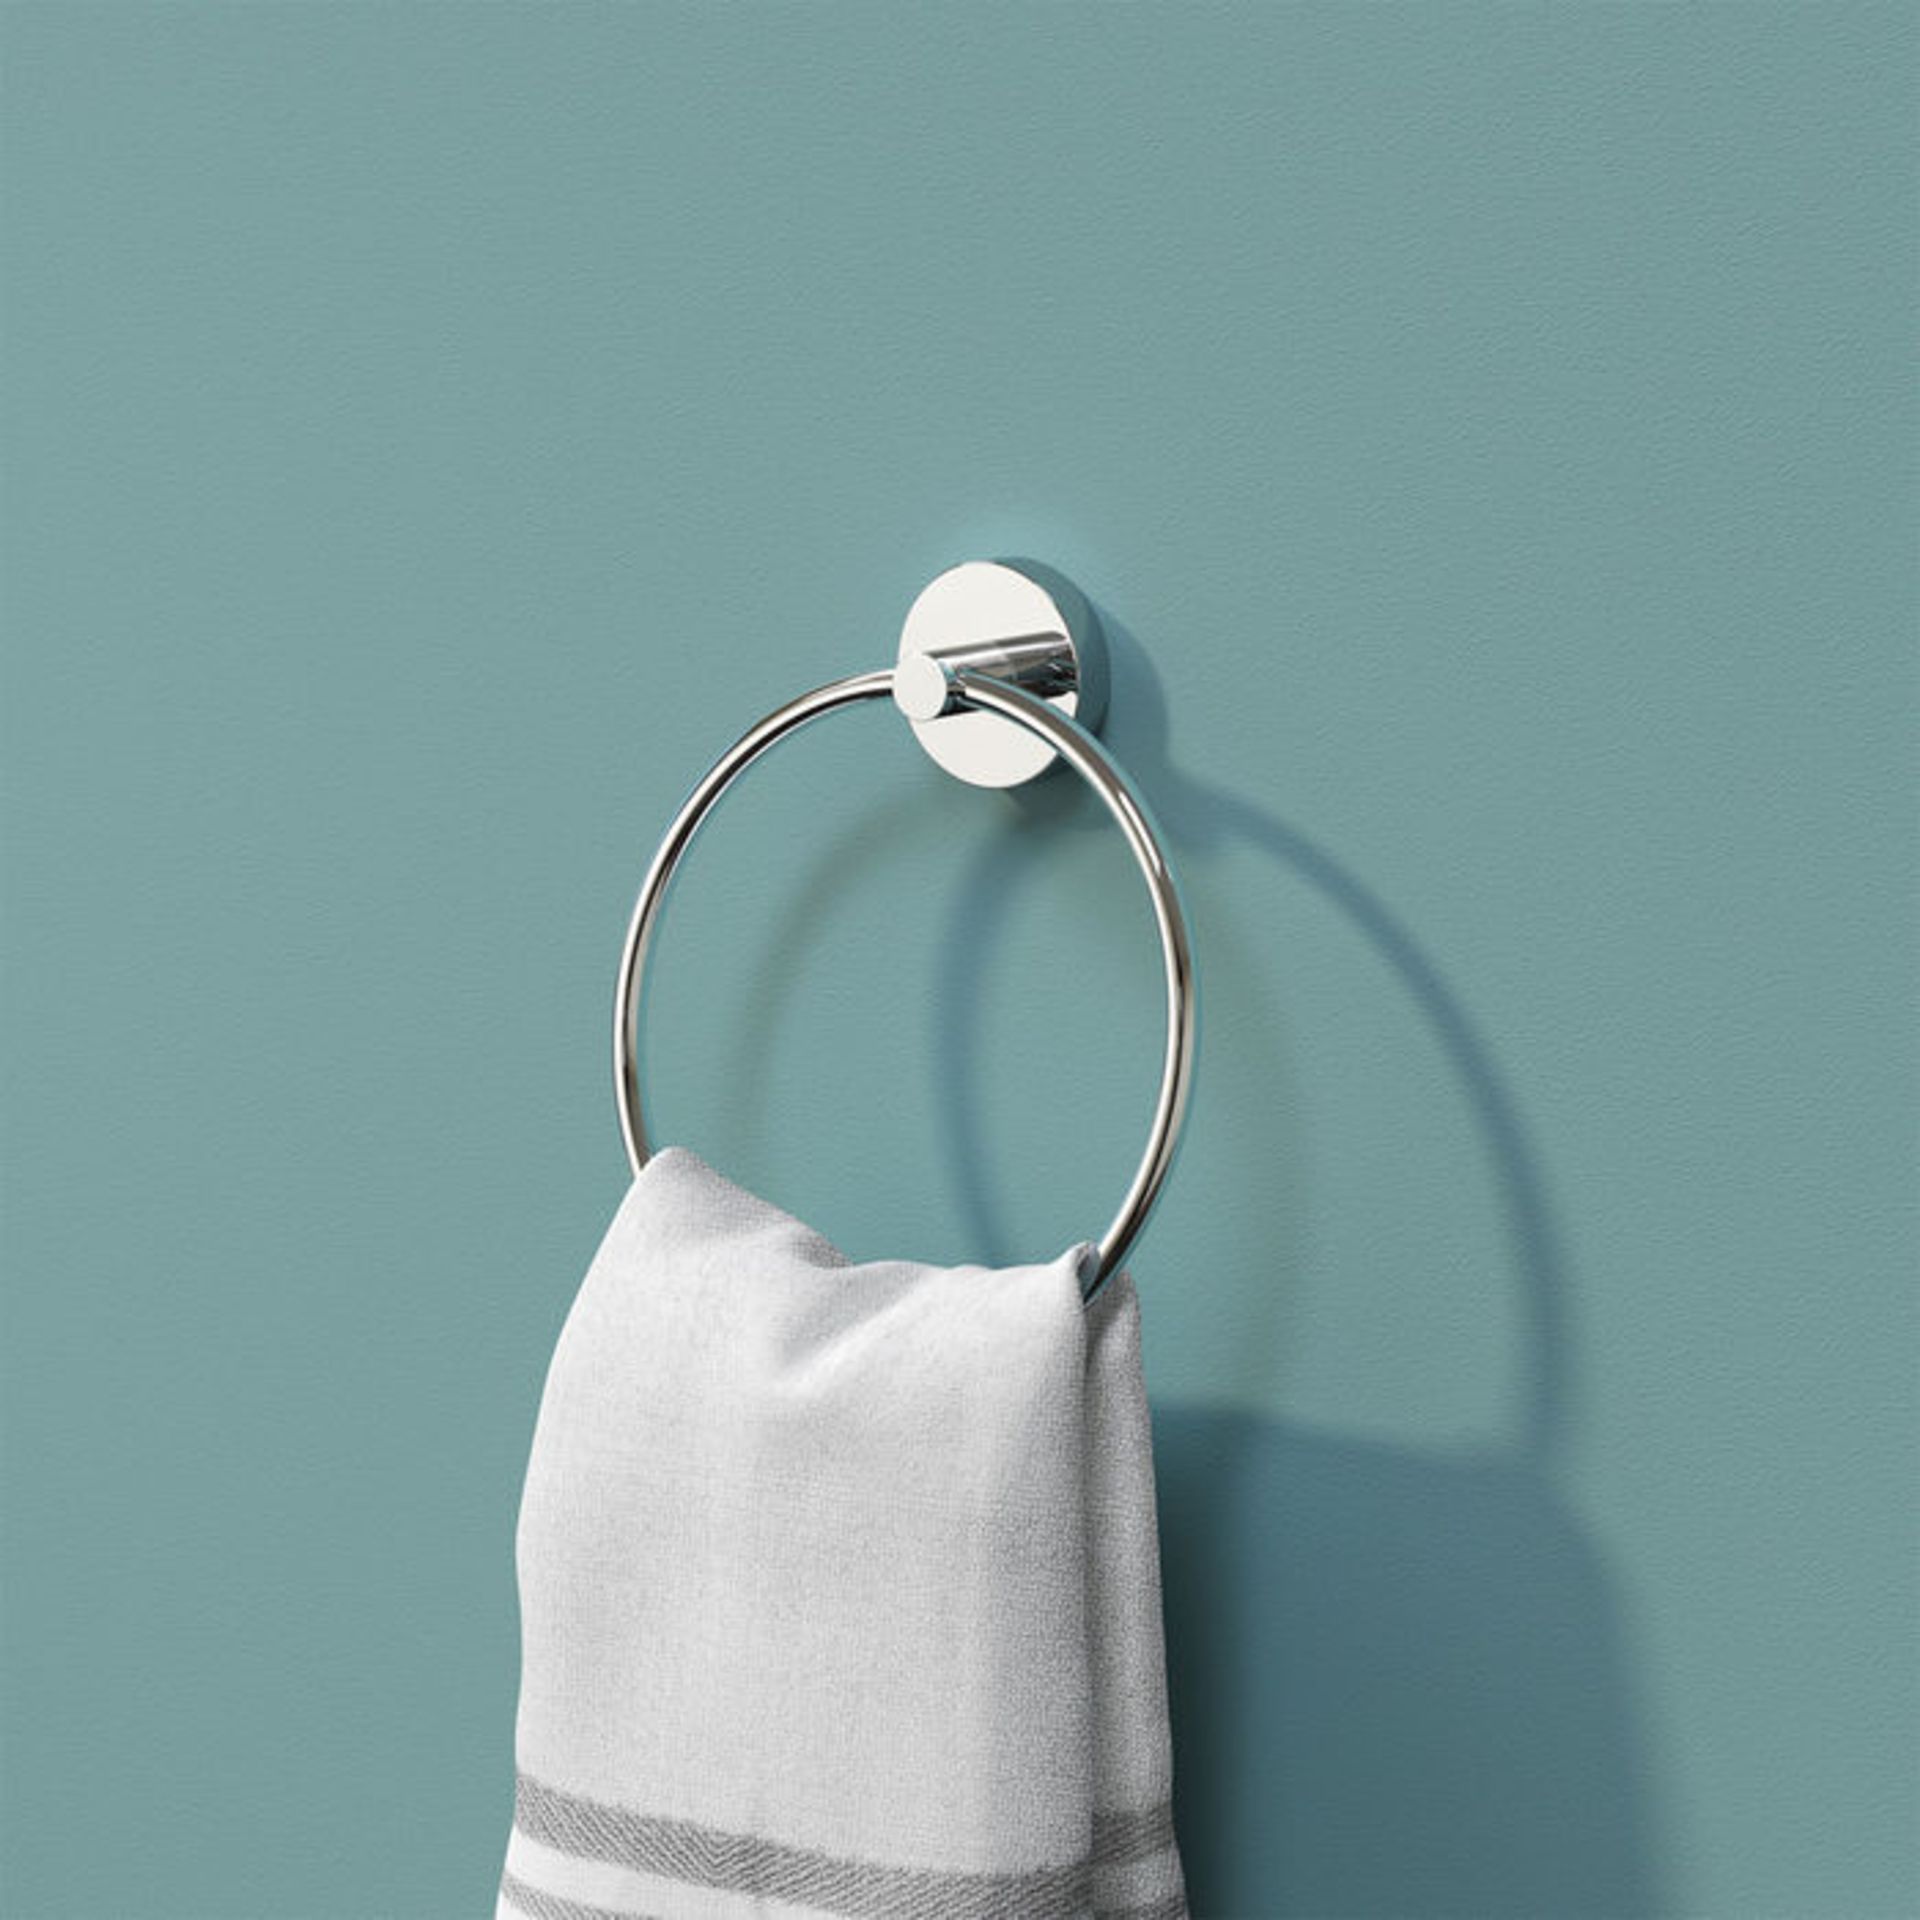 (NK104) Finsbury Towel RingSimple yet stylish Completes your bathroom with a little extra